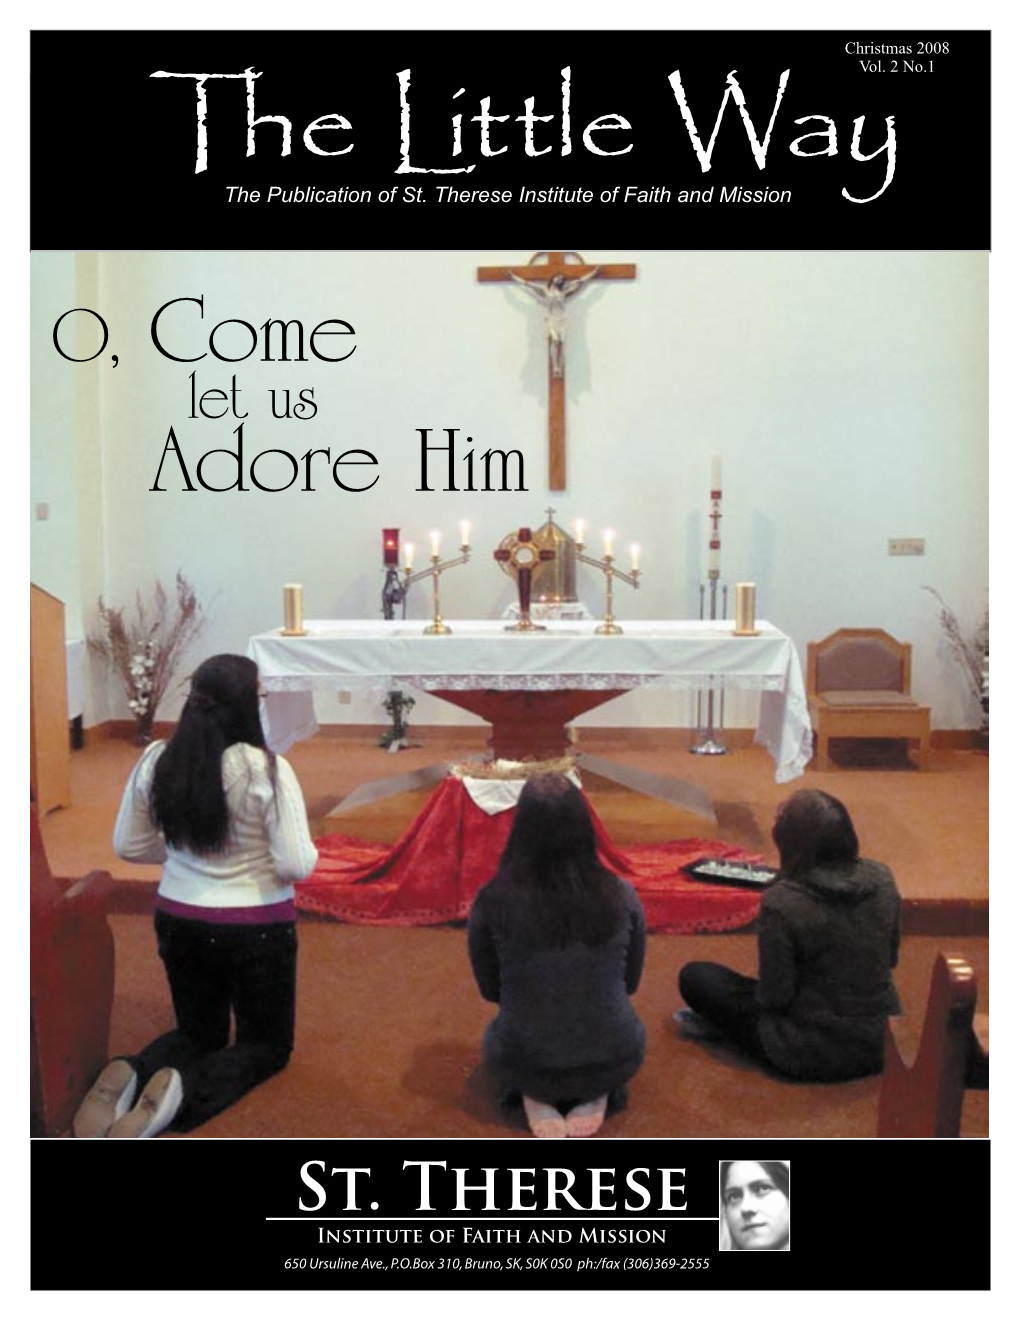 St. Therese Institute of Faith Wa and Mission Y O, Come Let Us Adore Him